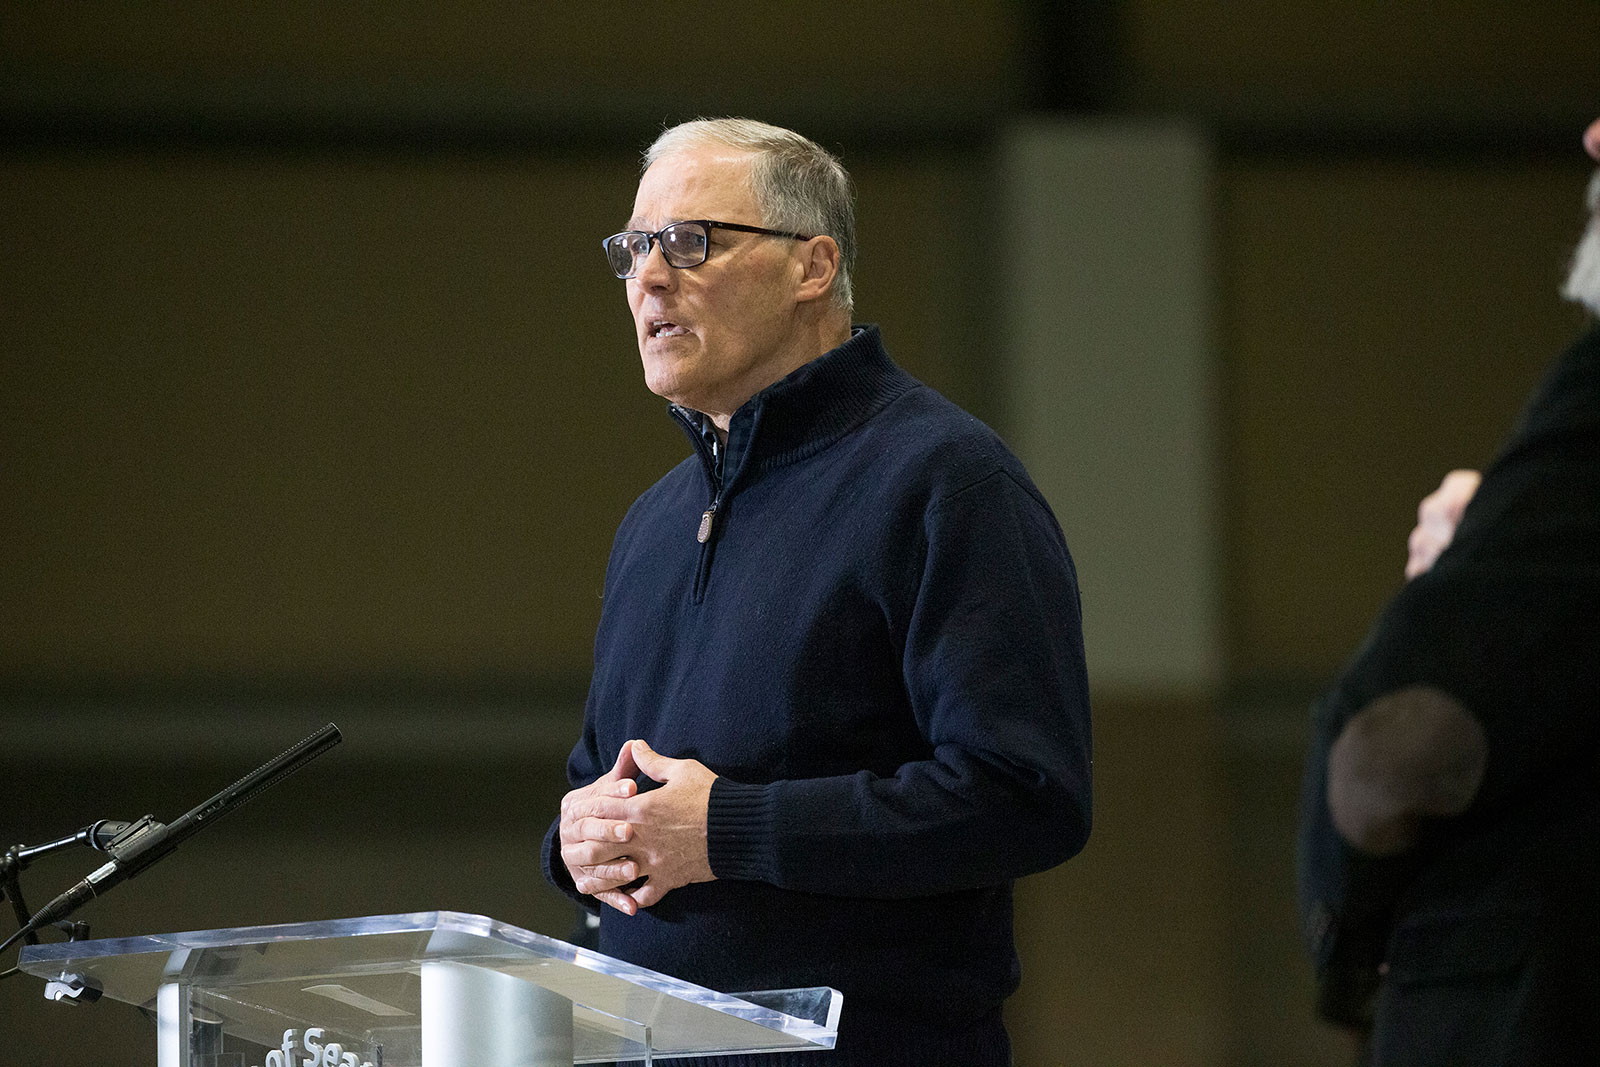 Washington Gov. Jay Inslee speaks during a press conference in March.